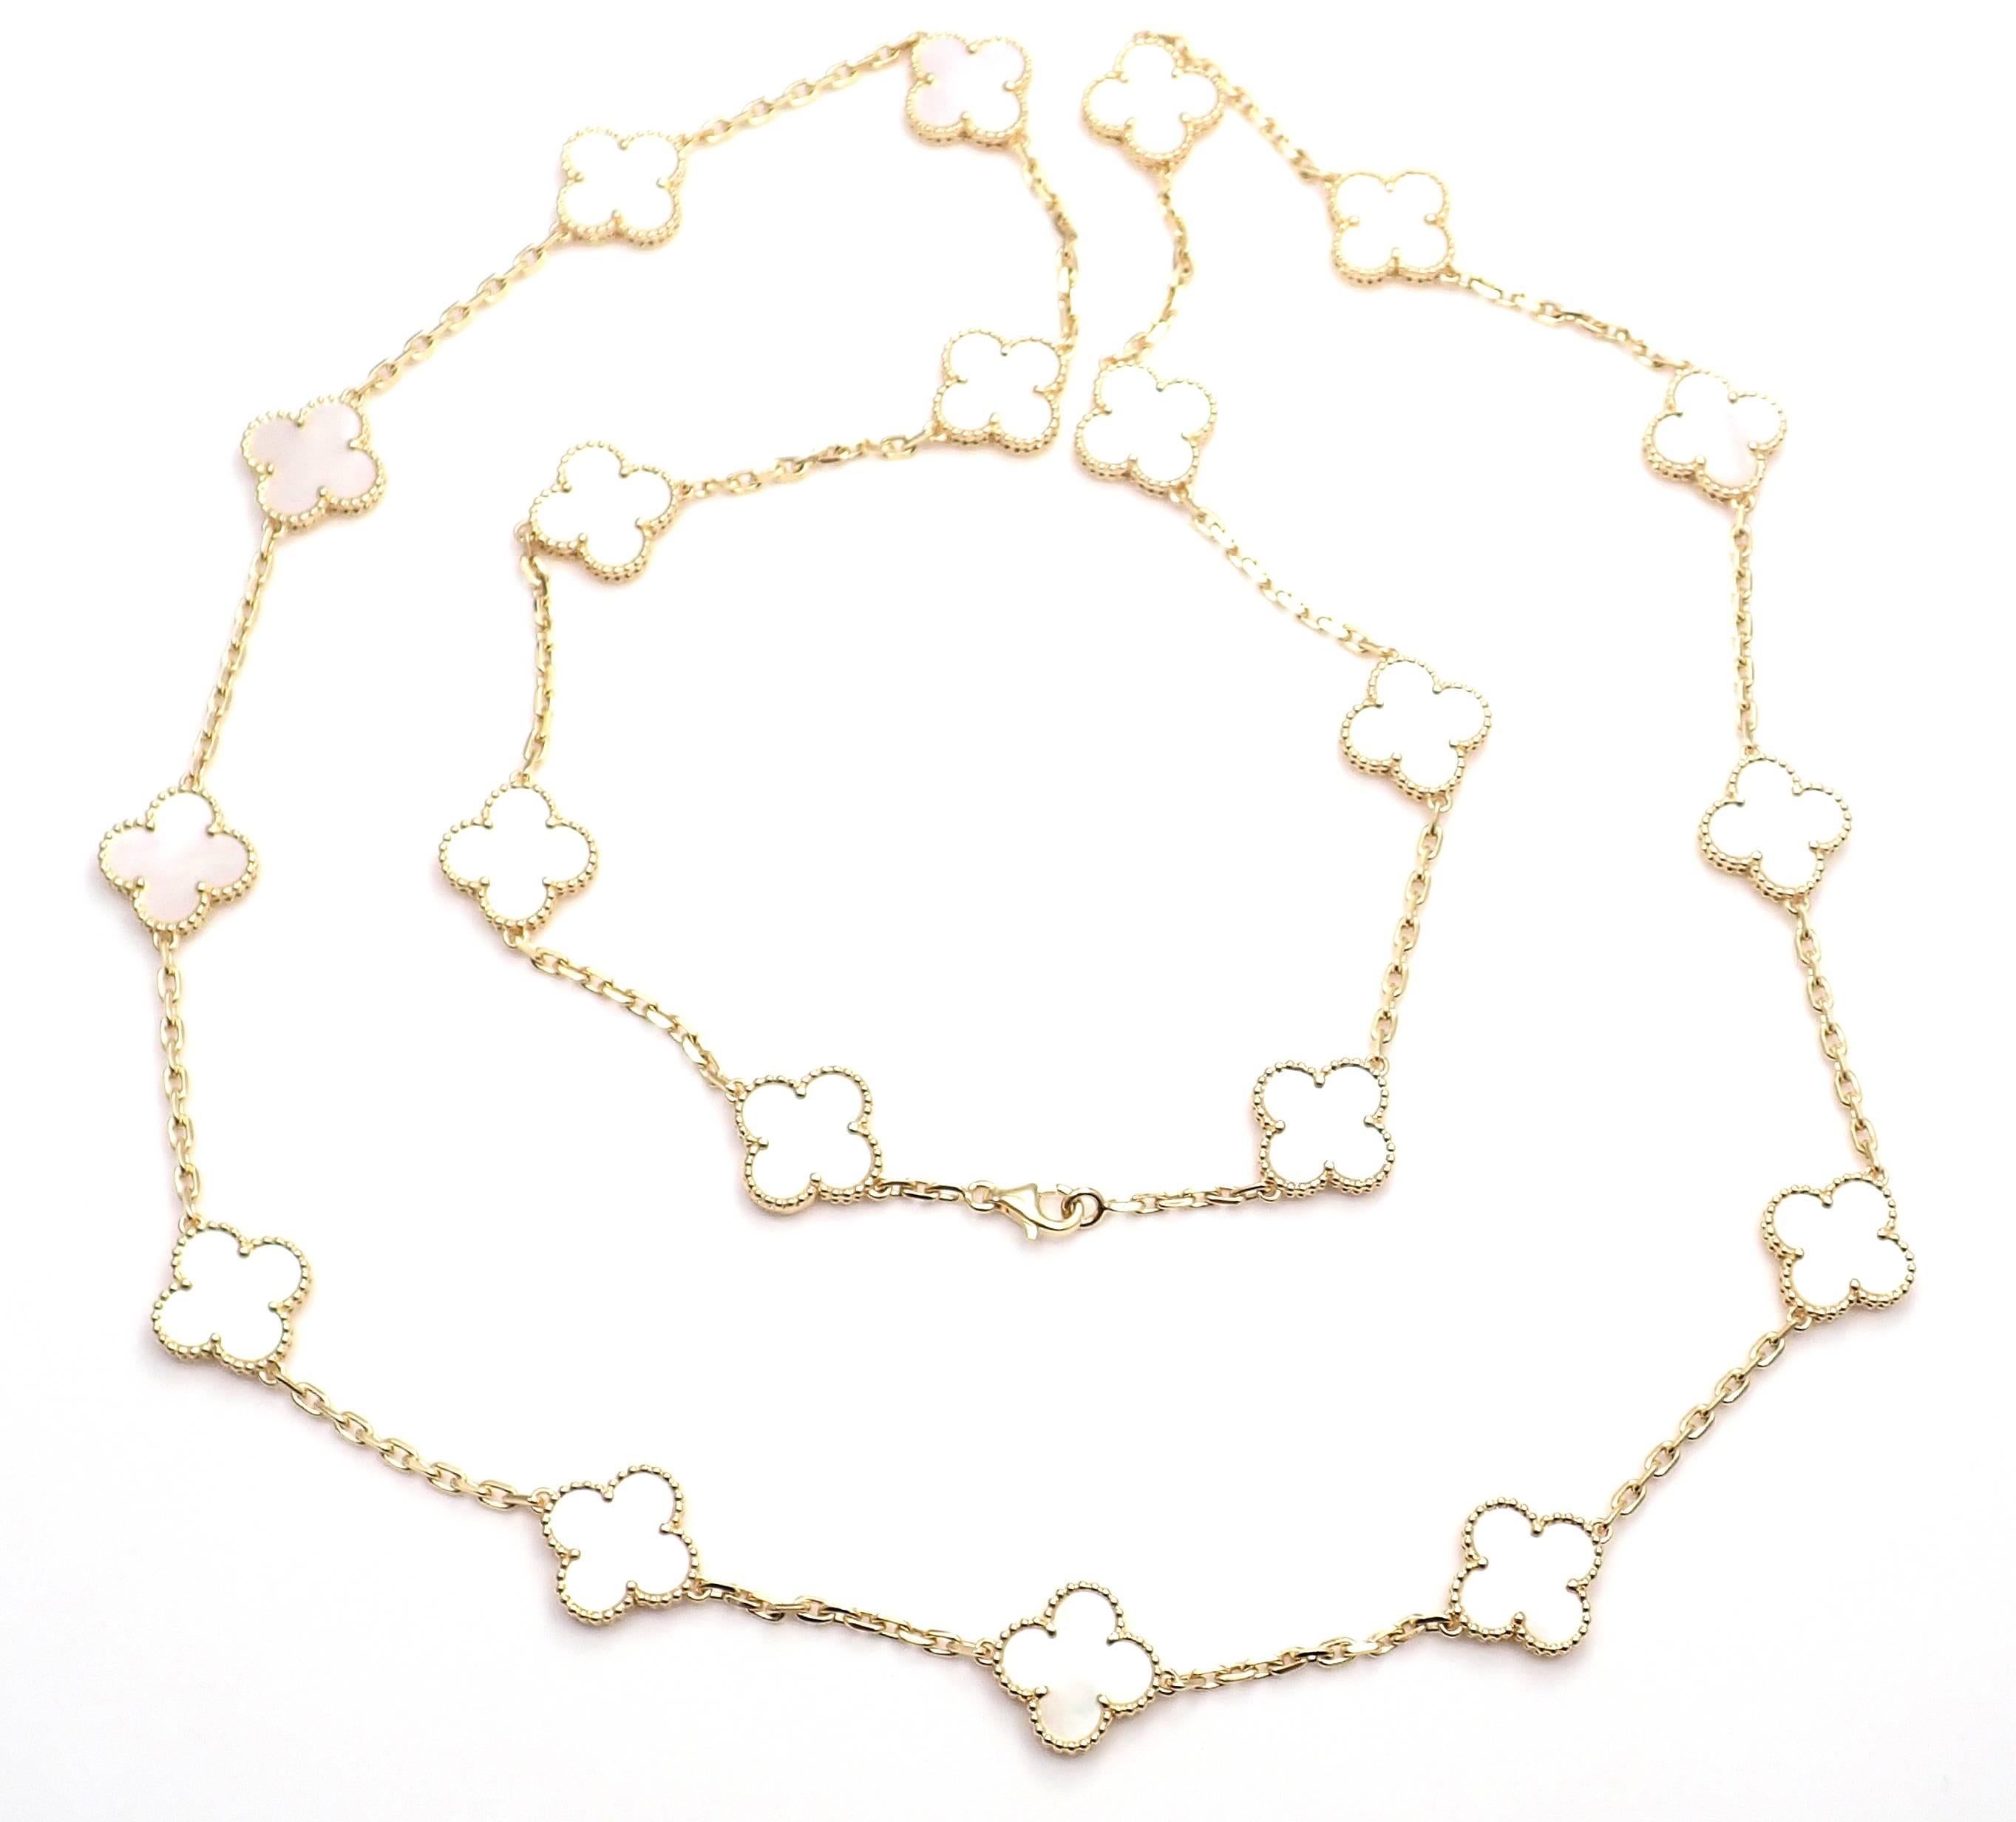 18k Yellow Gold Alhambra 20 Motifs Mother Of Pearl Necklace by Van Cleef & Arpels. 
With 20 motifs of mother of pearl Alhambra stones 15mm each.
This necklace comes with Van Cleef & Arpels certificate.
Details: 
Length: 33.6'' 
Width: 15mm
Weight: